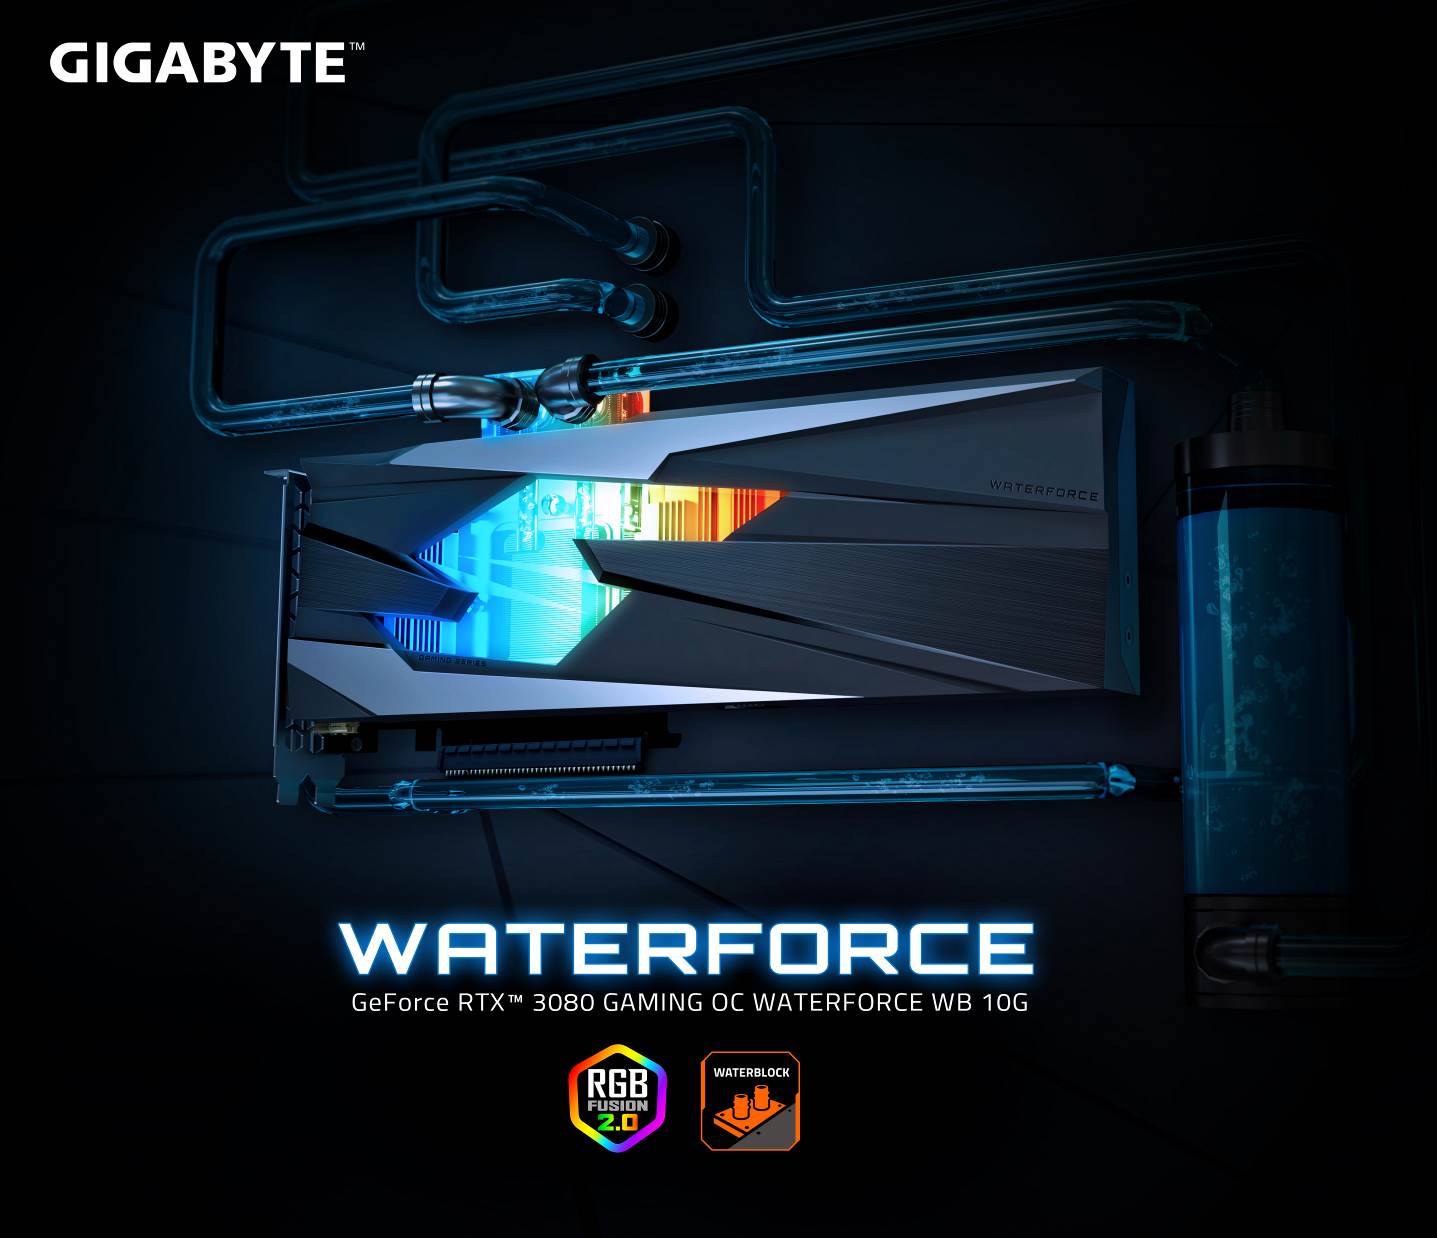 GIGABYTE Launches GeForce RTX™ 3080 GAMING OC WATERFORCE WB 10G graphics card